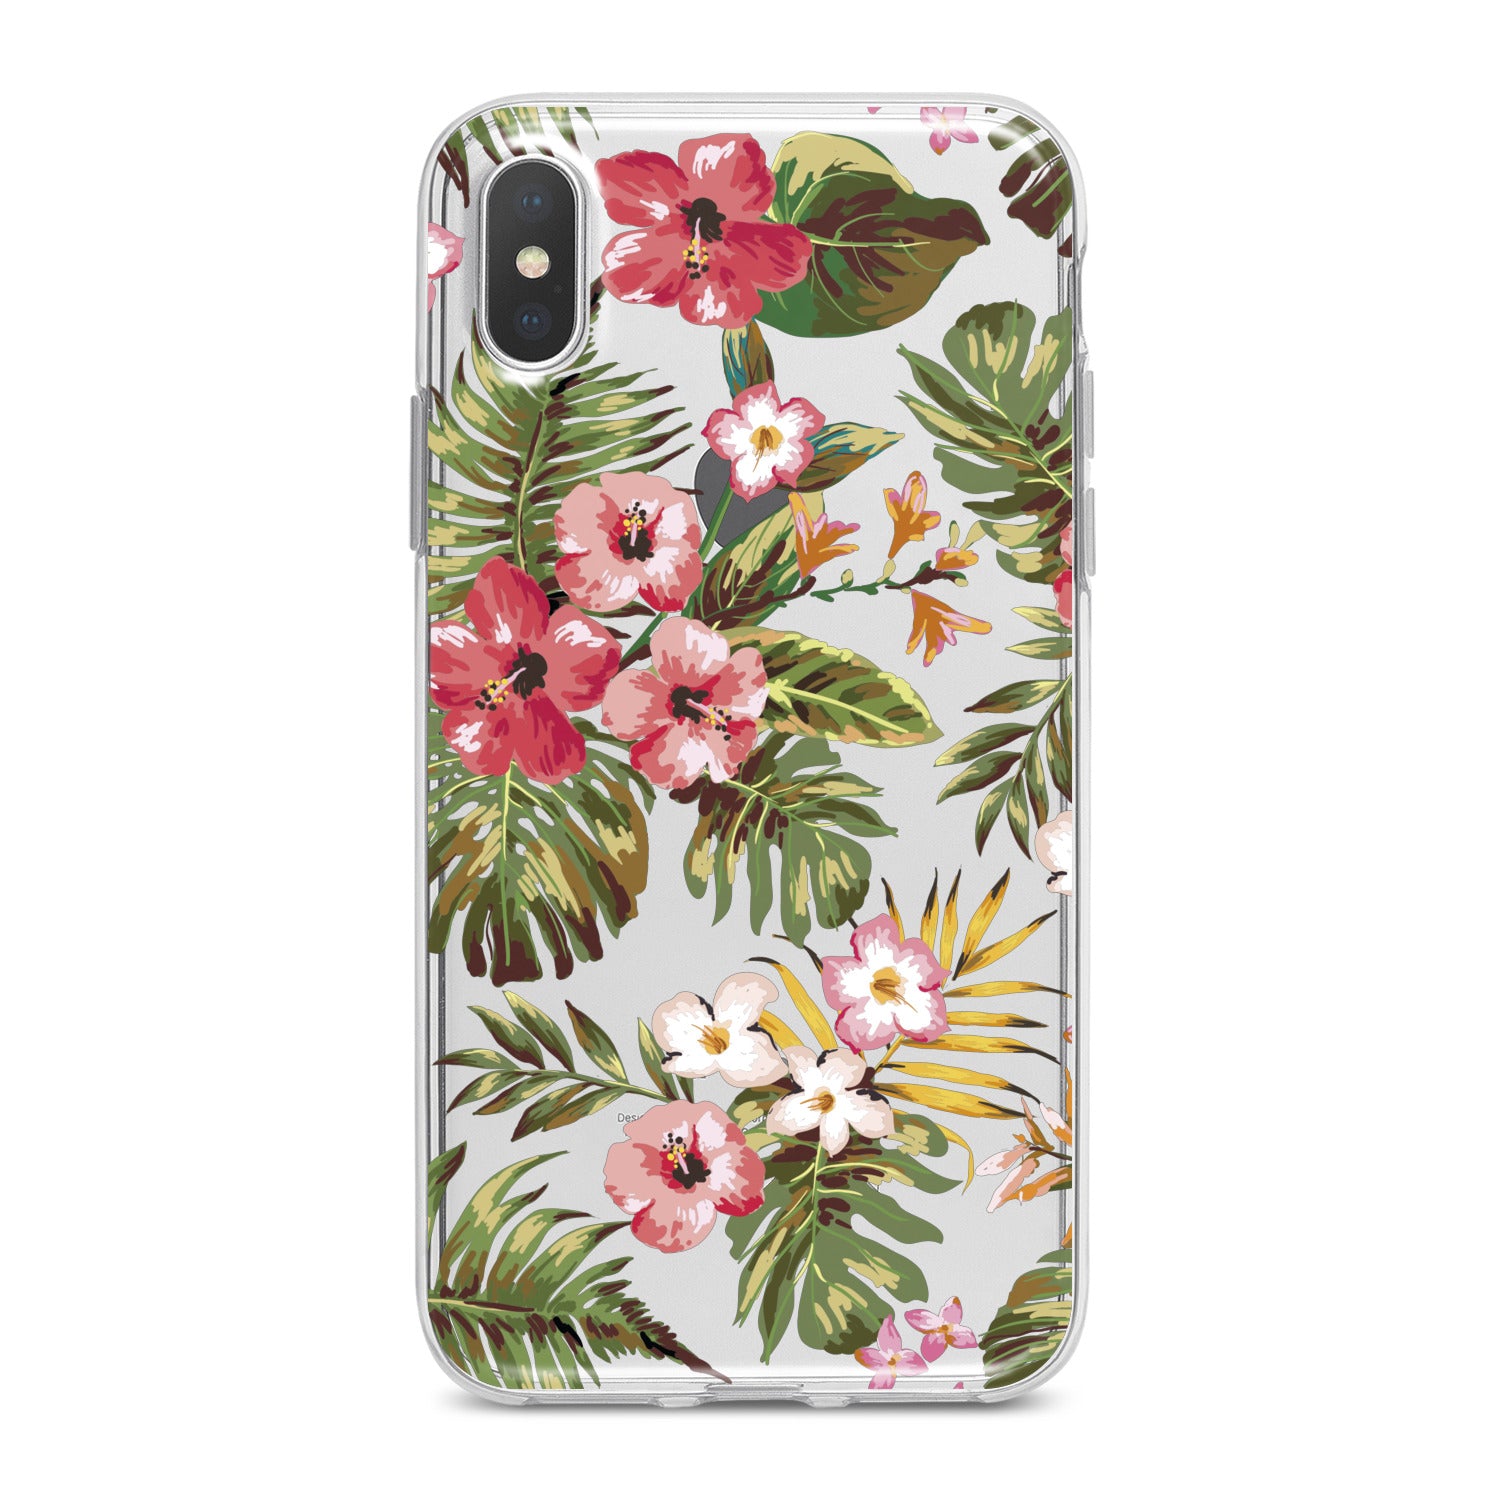 Lex Altern Tropical Pattern Phone Case for your iPhone & Android phone.